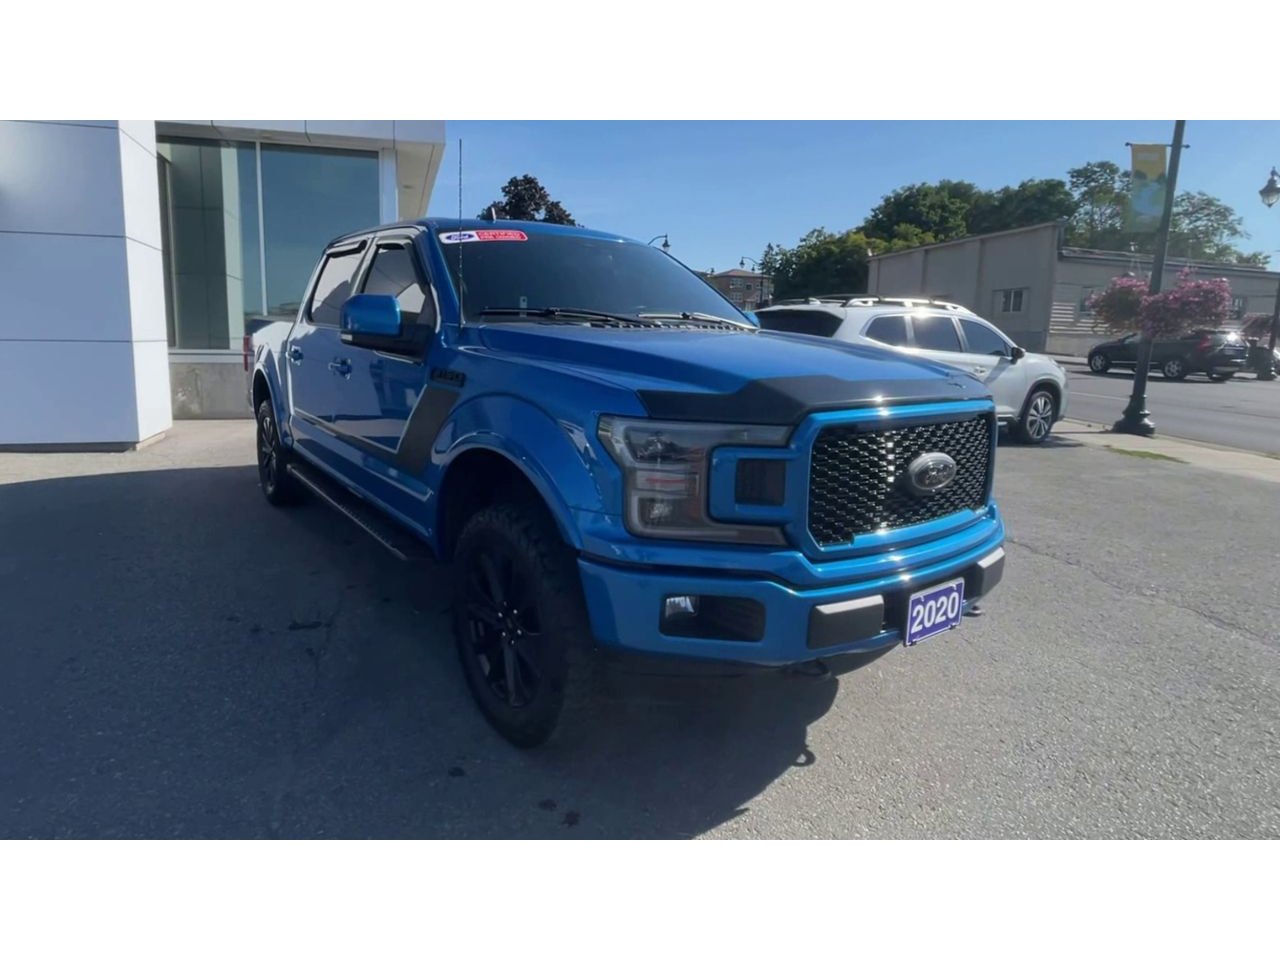 2020 Ford F-150 - 21299A Full Image 3